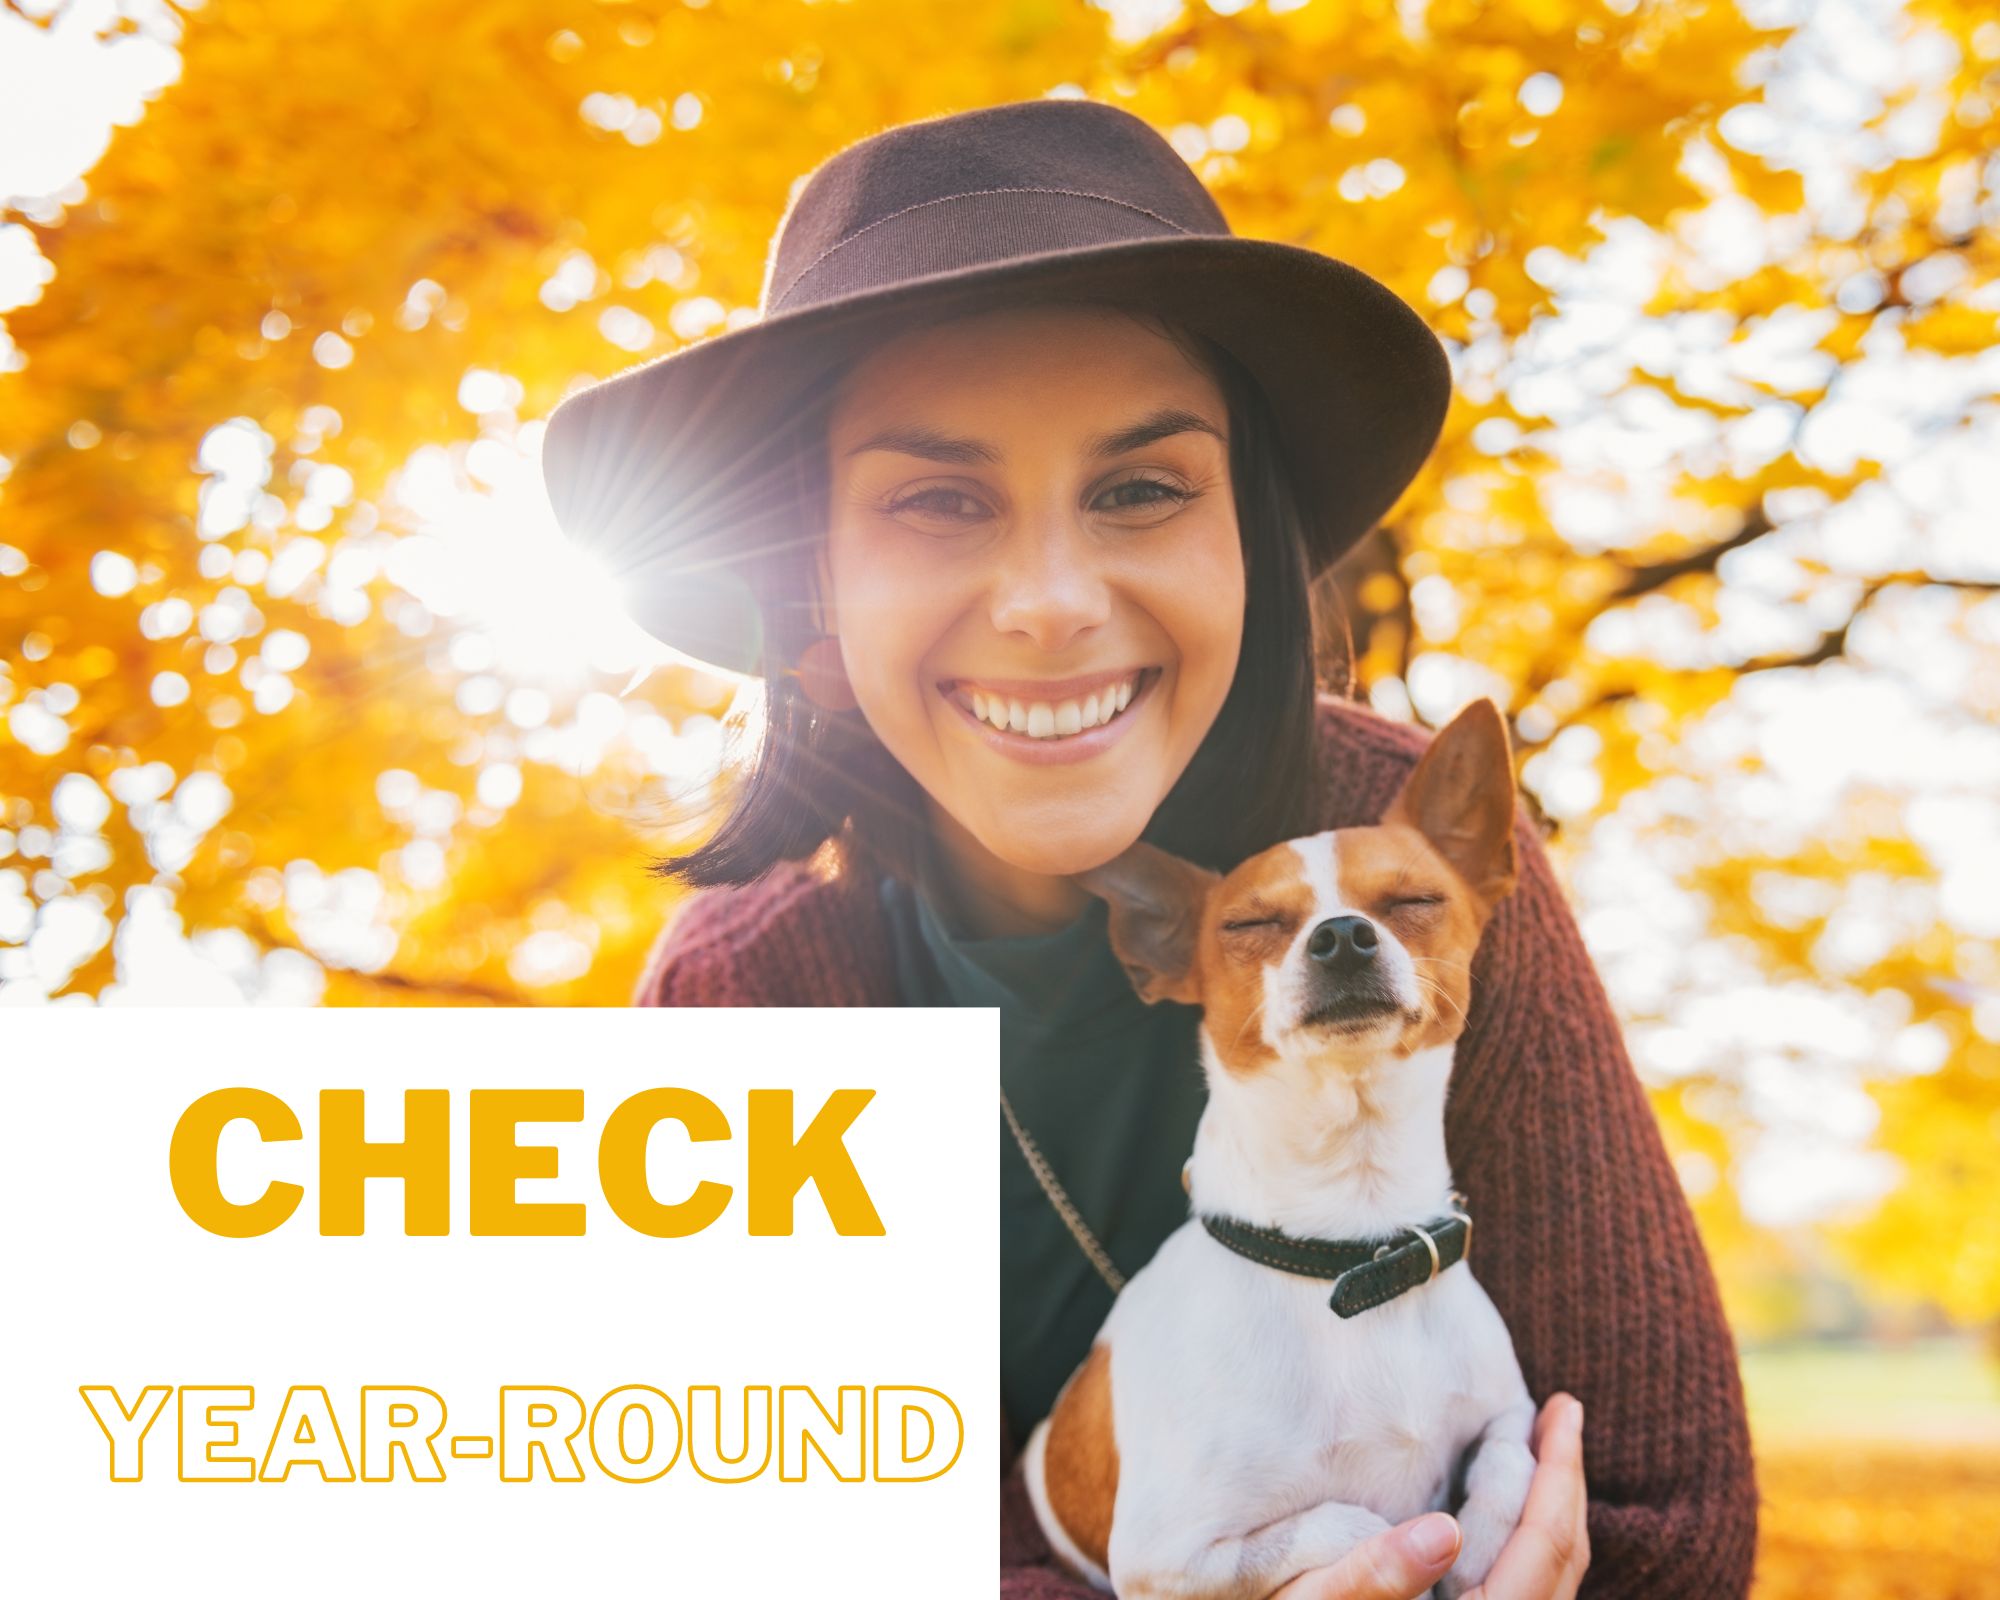 Leafy golden fall tree in background with smiling woman in hat with small dog in foreground. Words "Check Year-Round"